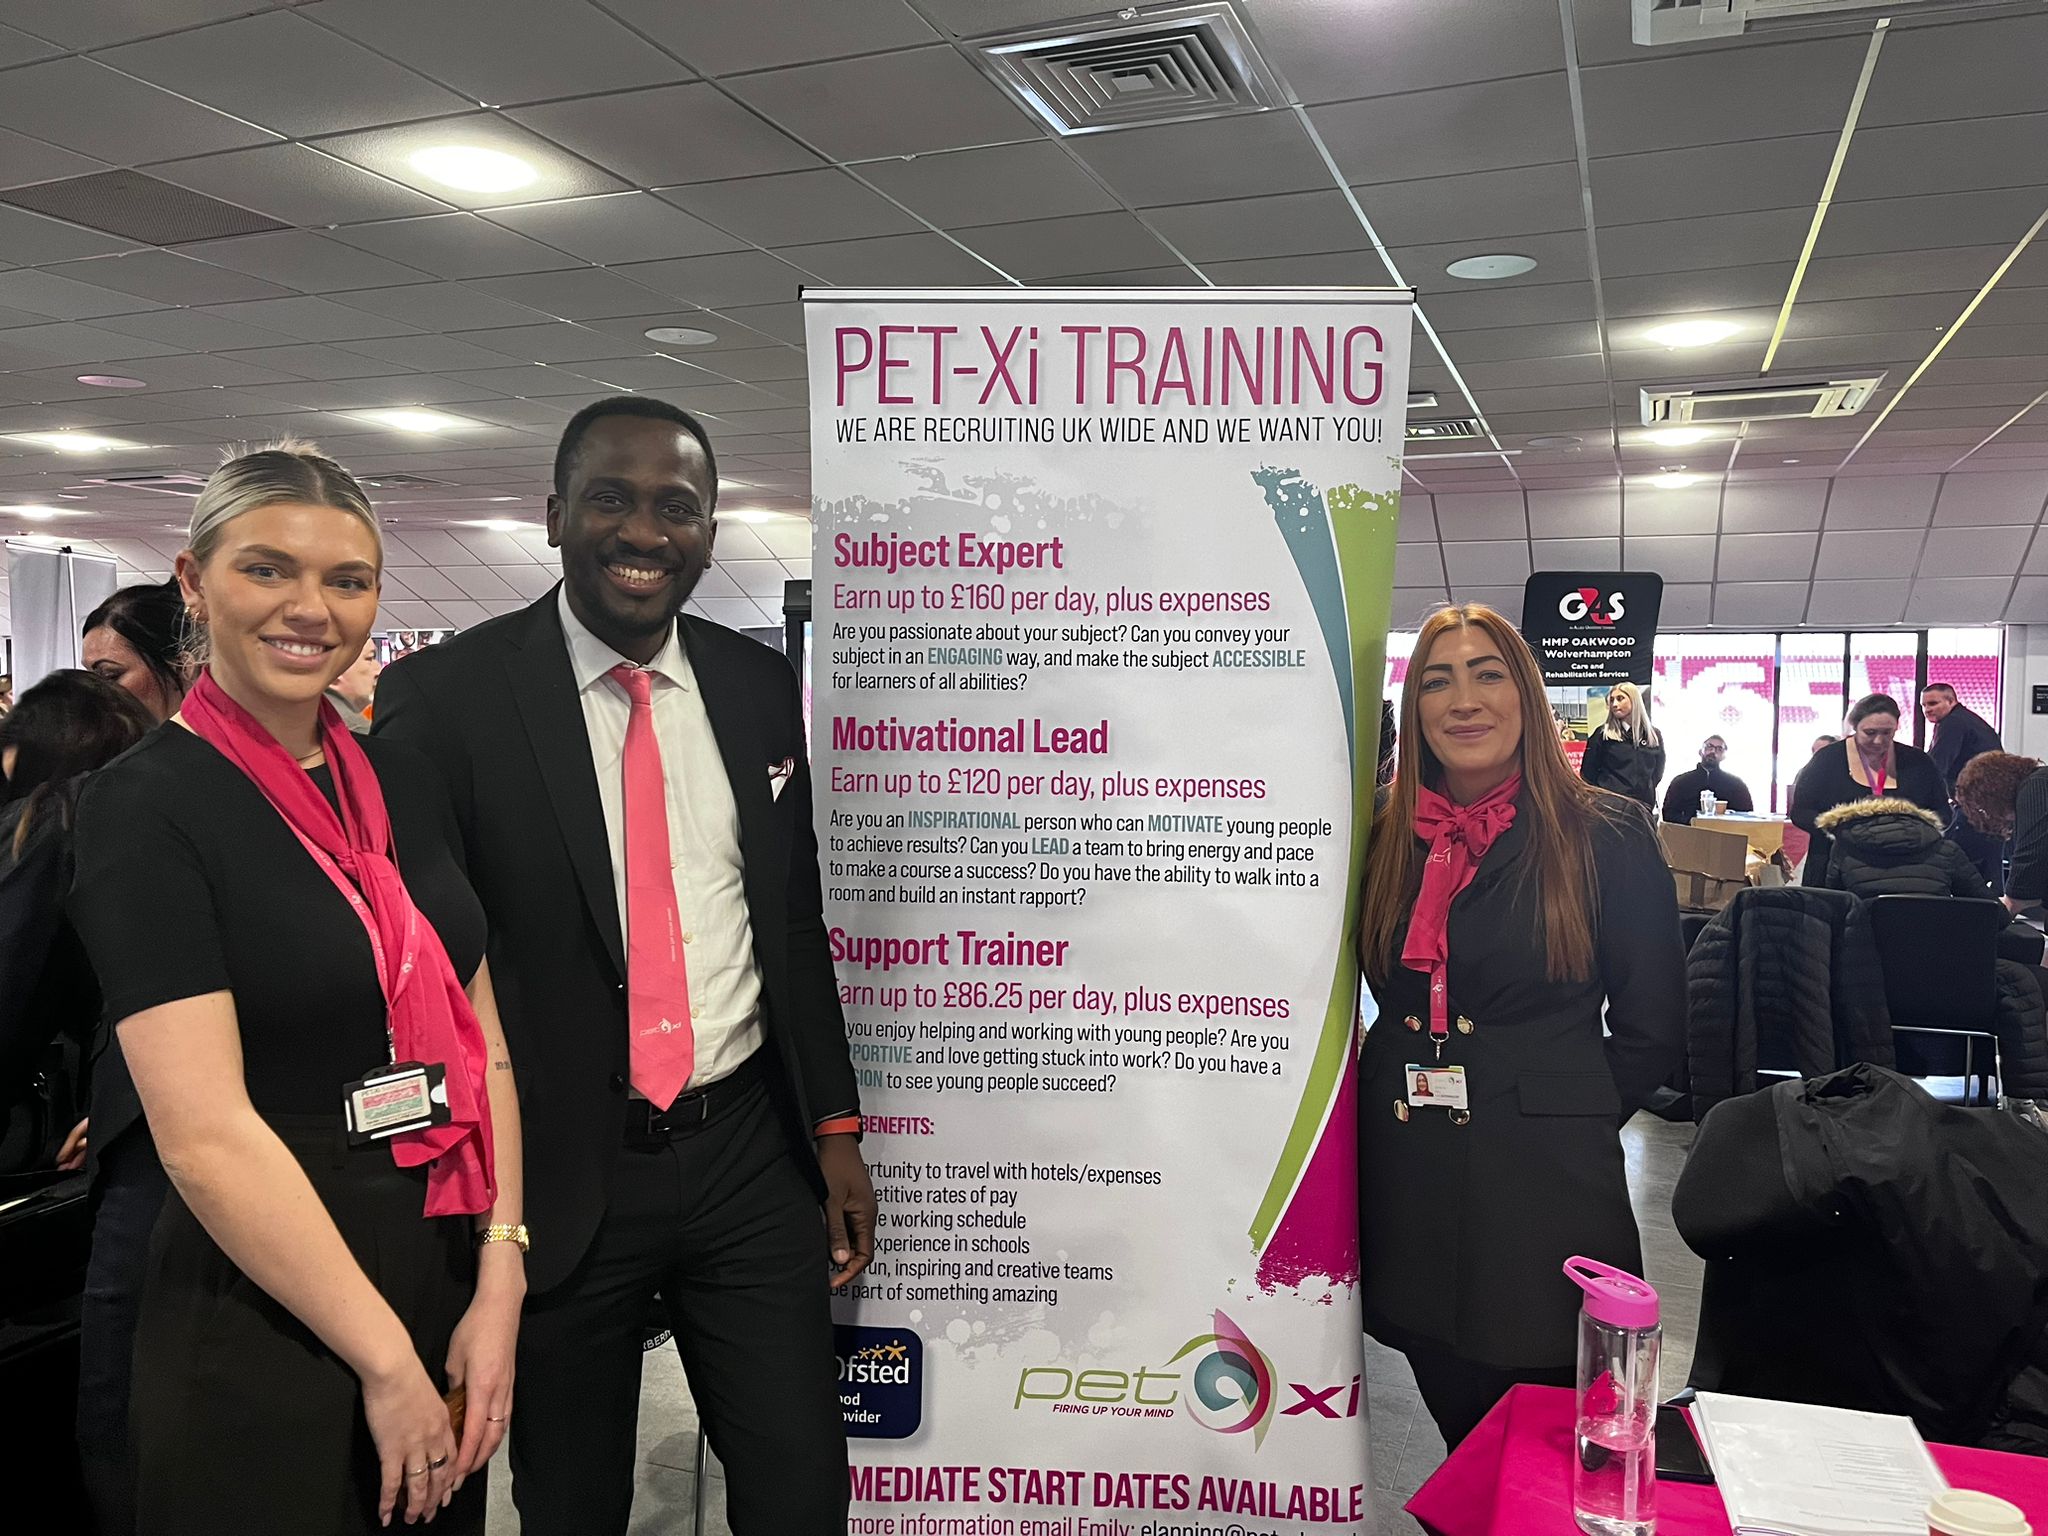 Pet-Xi at our event in Stoke-on-Trent